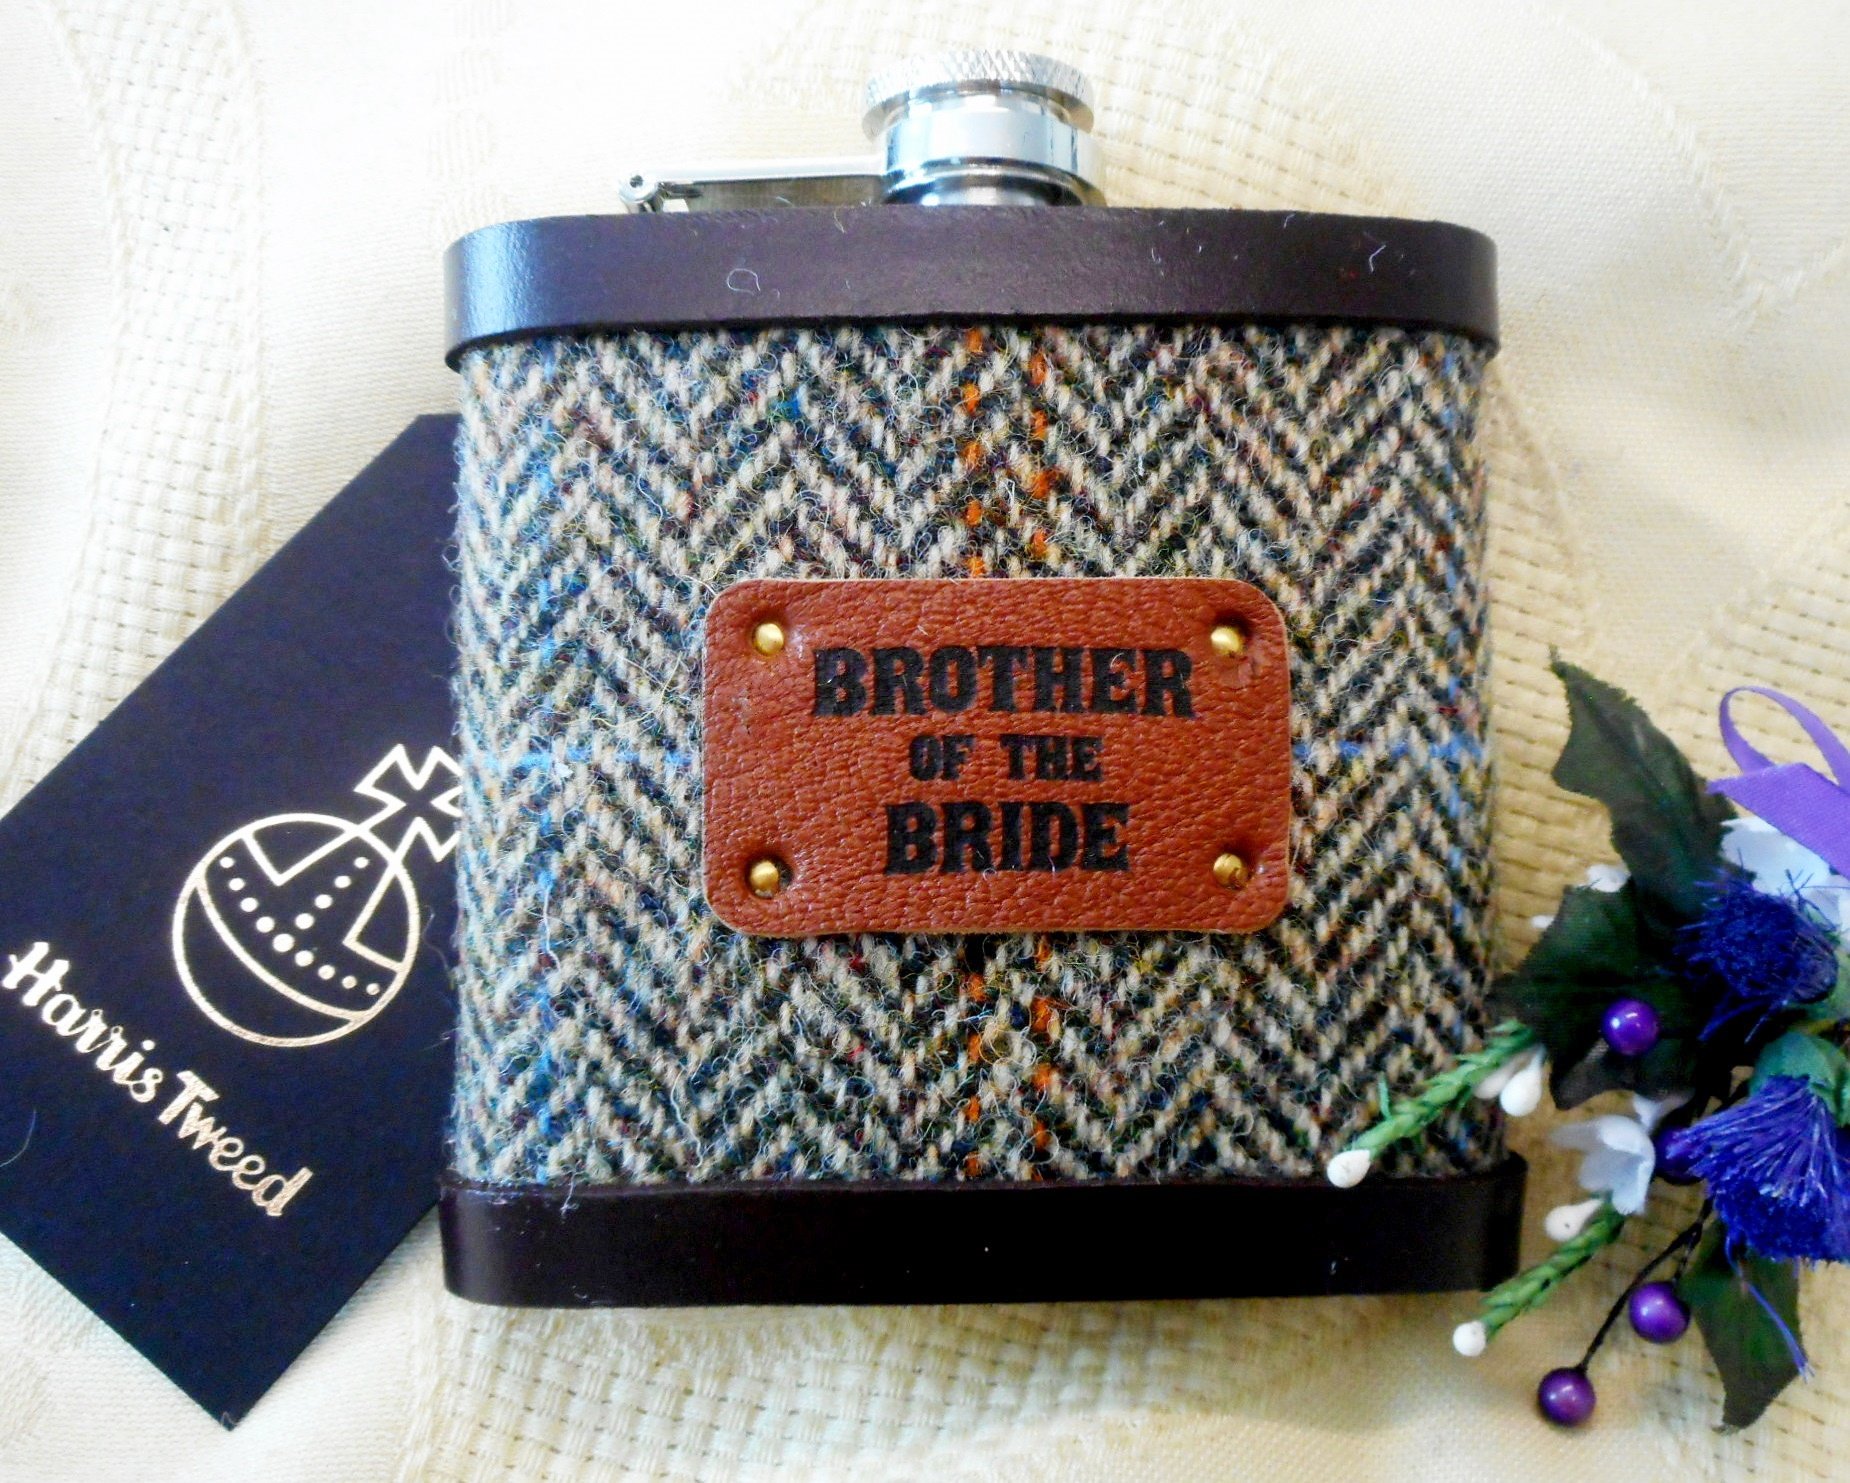 Brother-of-the-bride-gift-harris-tweed-hip-flask-scottish-tweed-with-a-twist